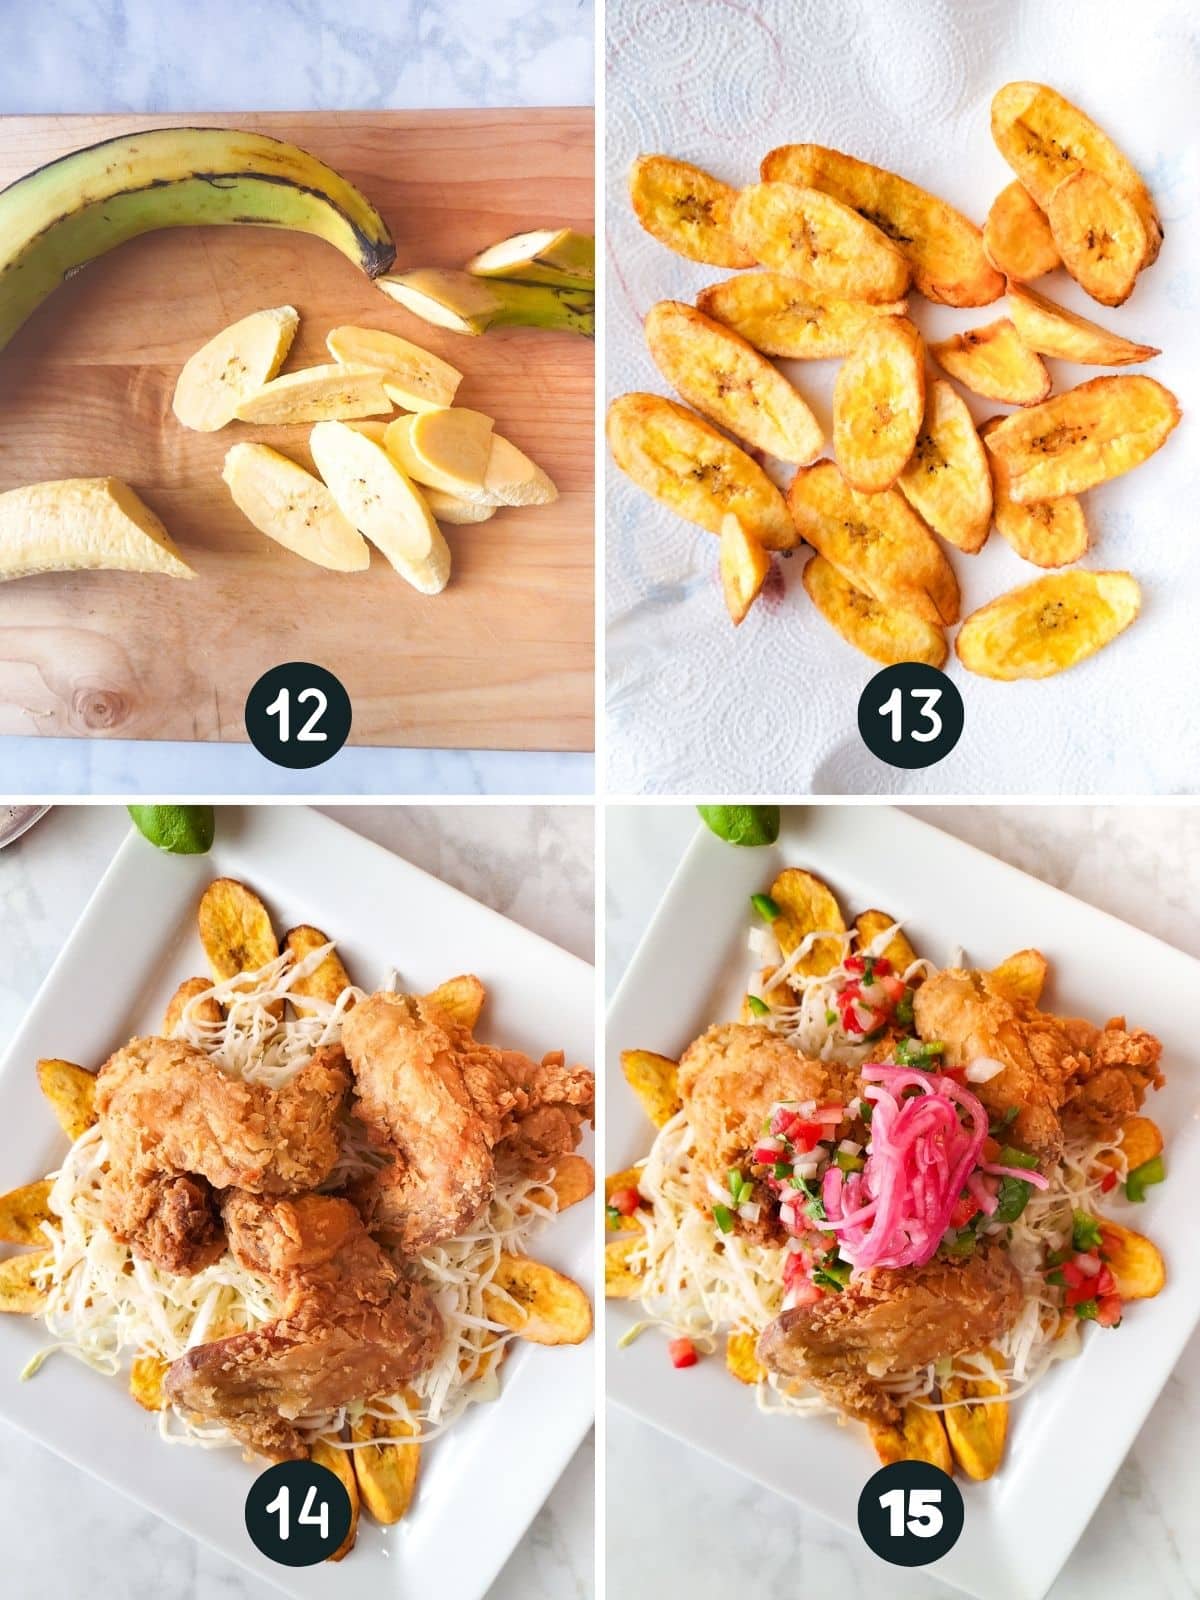 A collage photo of steps 12-15. Step 12 shows the plantains being cut. Step 13, shows shows the plantains drained on a plate lined with a paper towel. Step 14 and 15, shows the poll chuco being layered with the different sides to form the full dish.